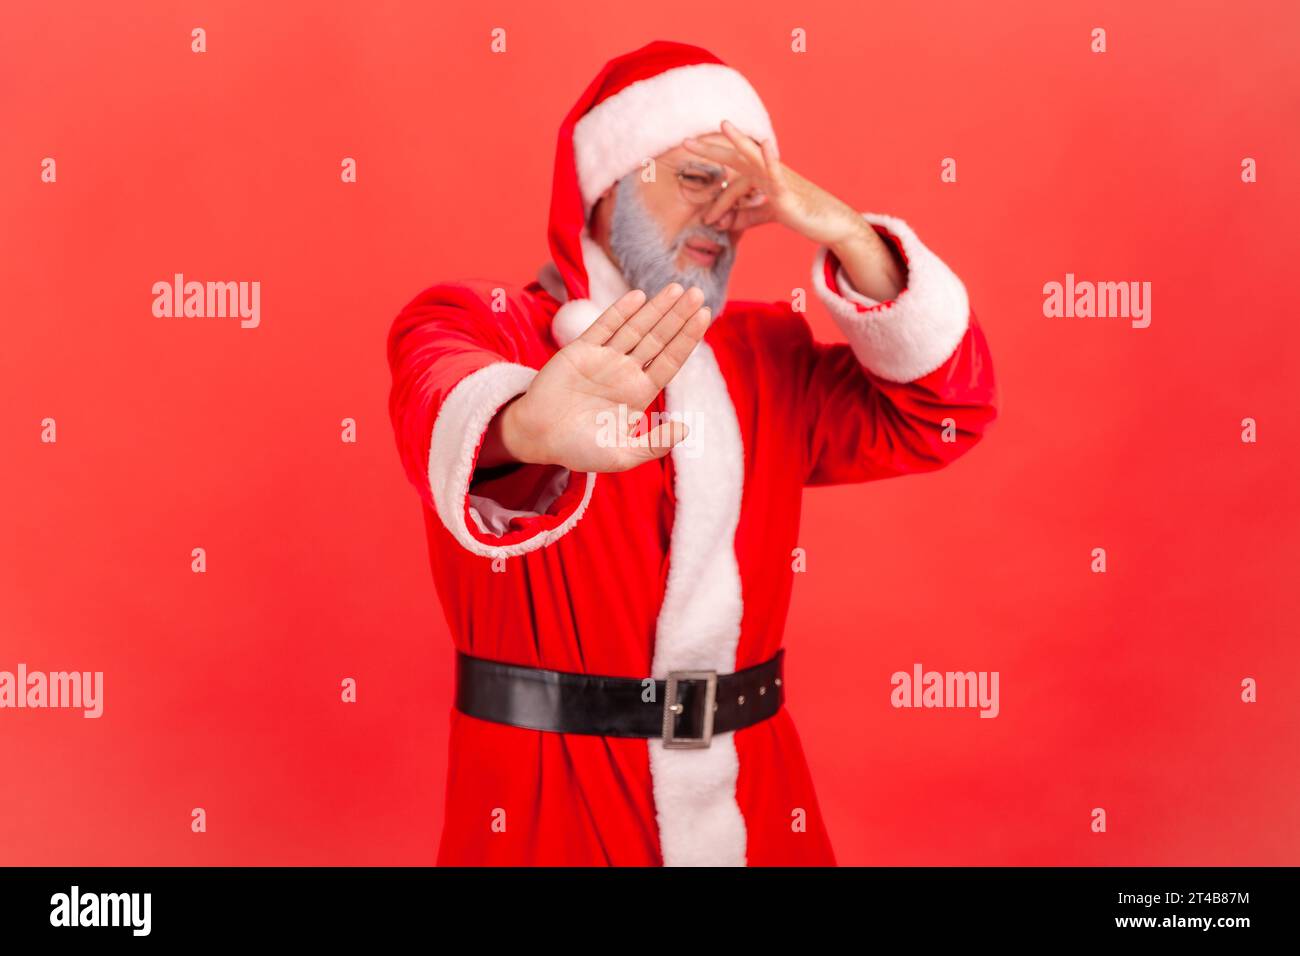 Santa claus in red costume pinching nose with fingers to avoid bad smell and showing stop gesture, demonstrating repulsion to stink, awful odor. Indoor studio shot isolated on red background. Stock Photo